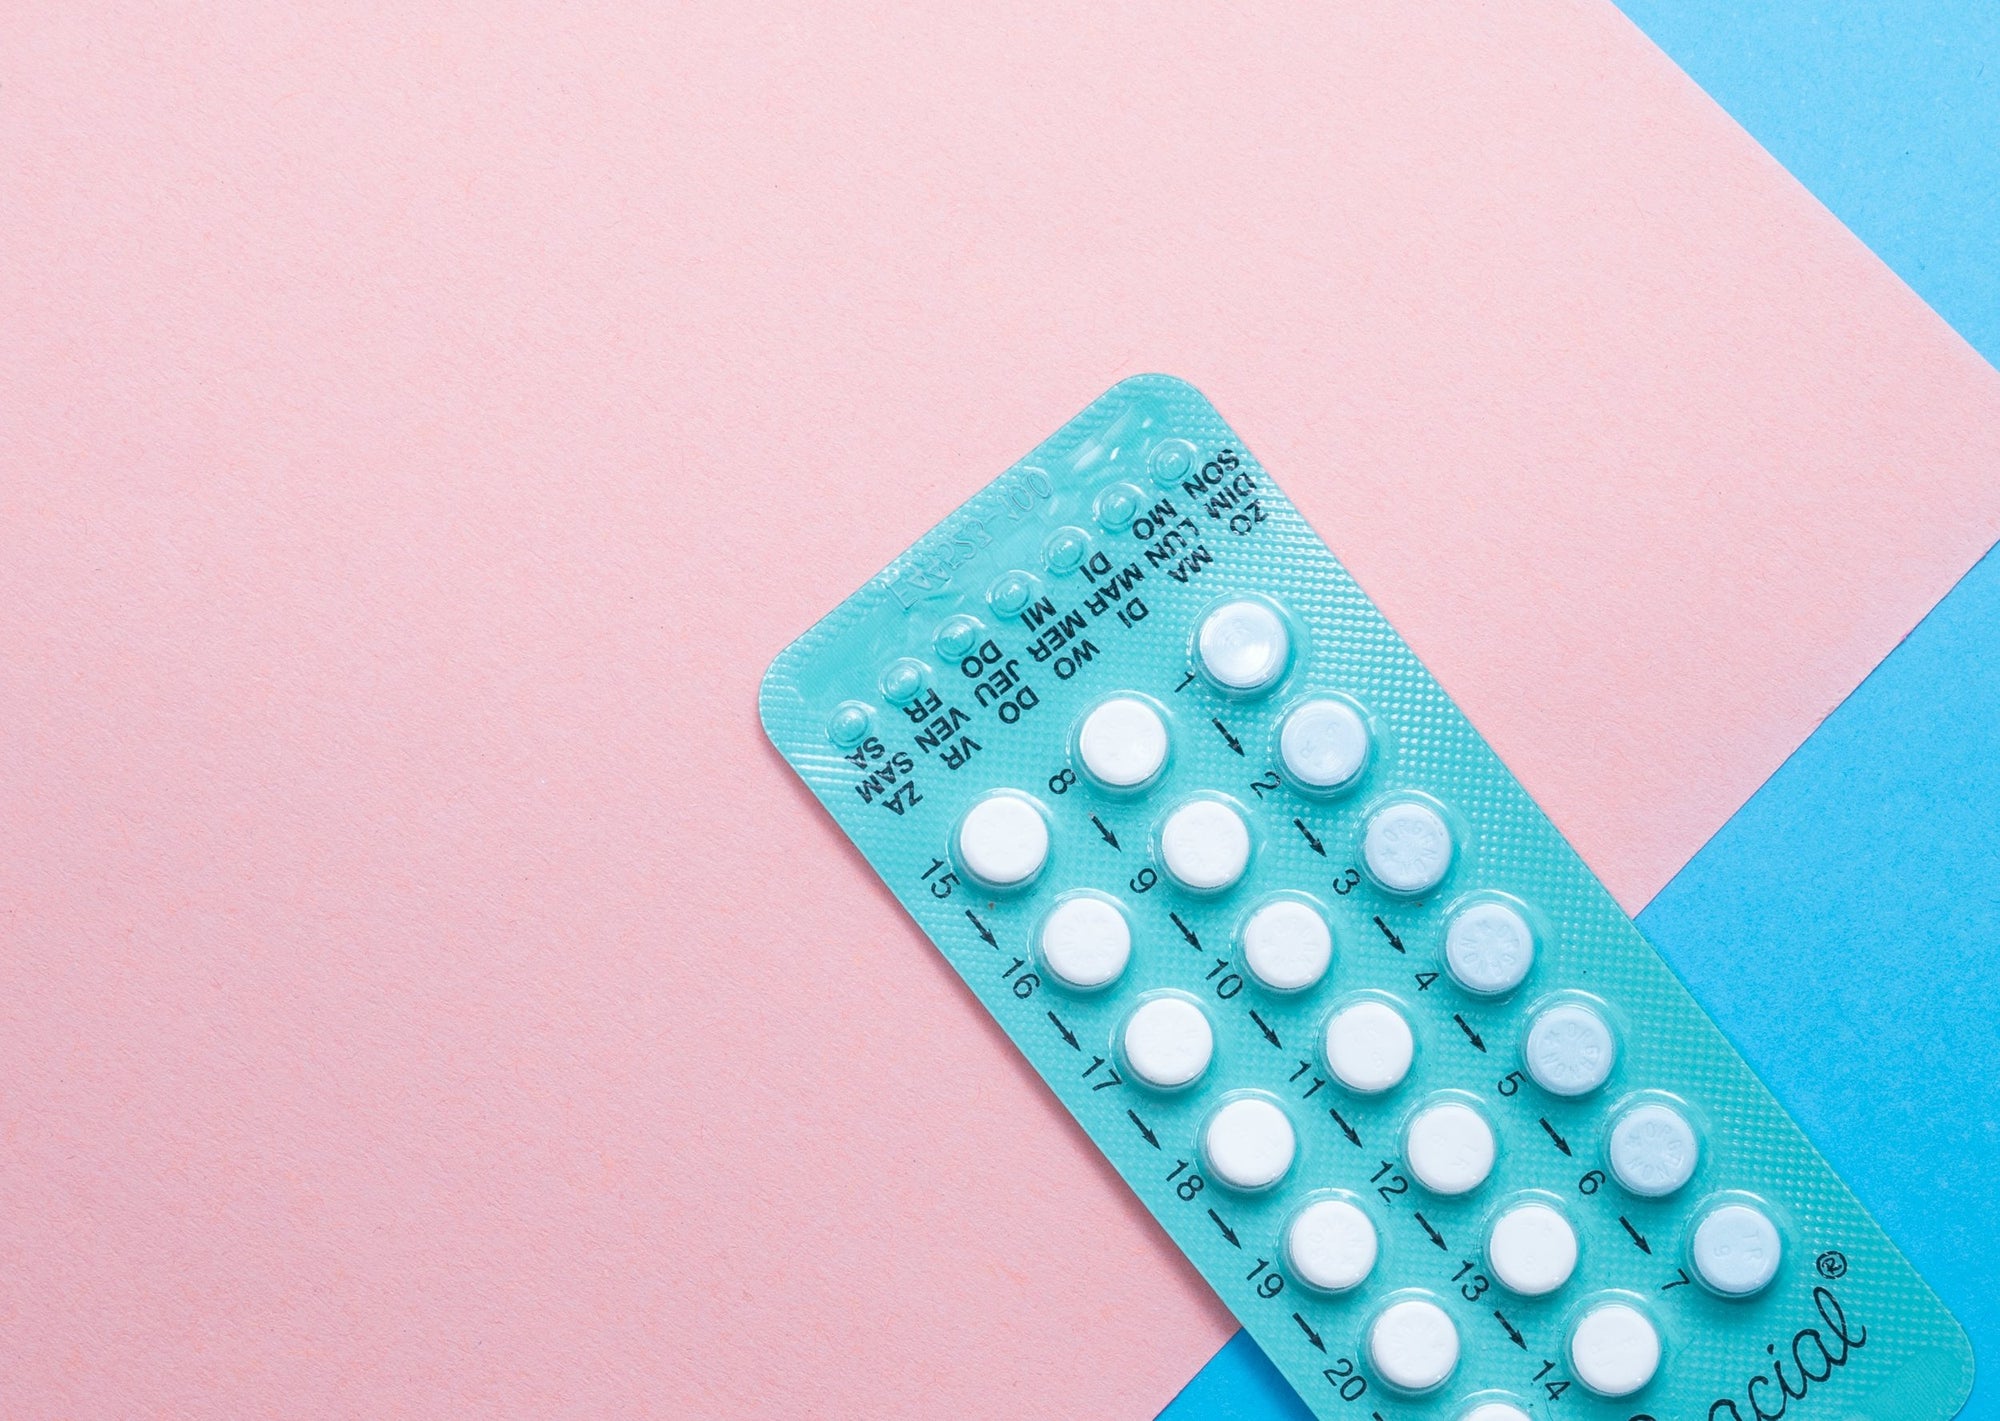 Could it be time to give your body a break from the pill?